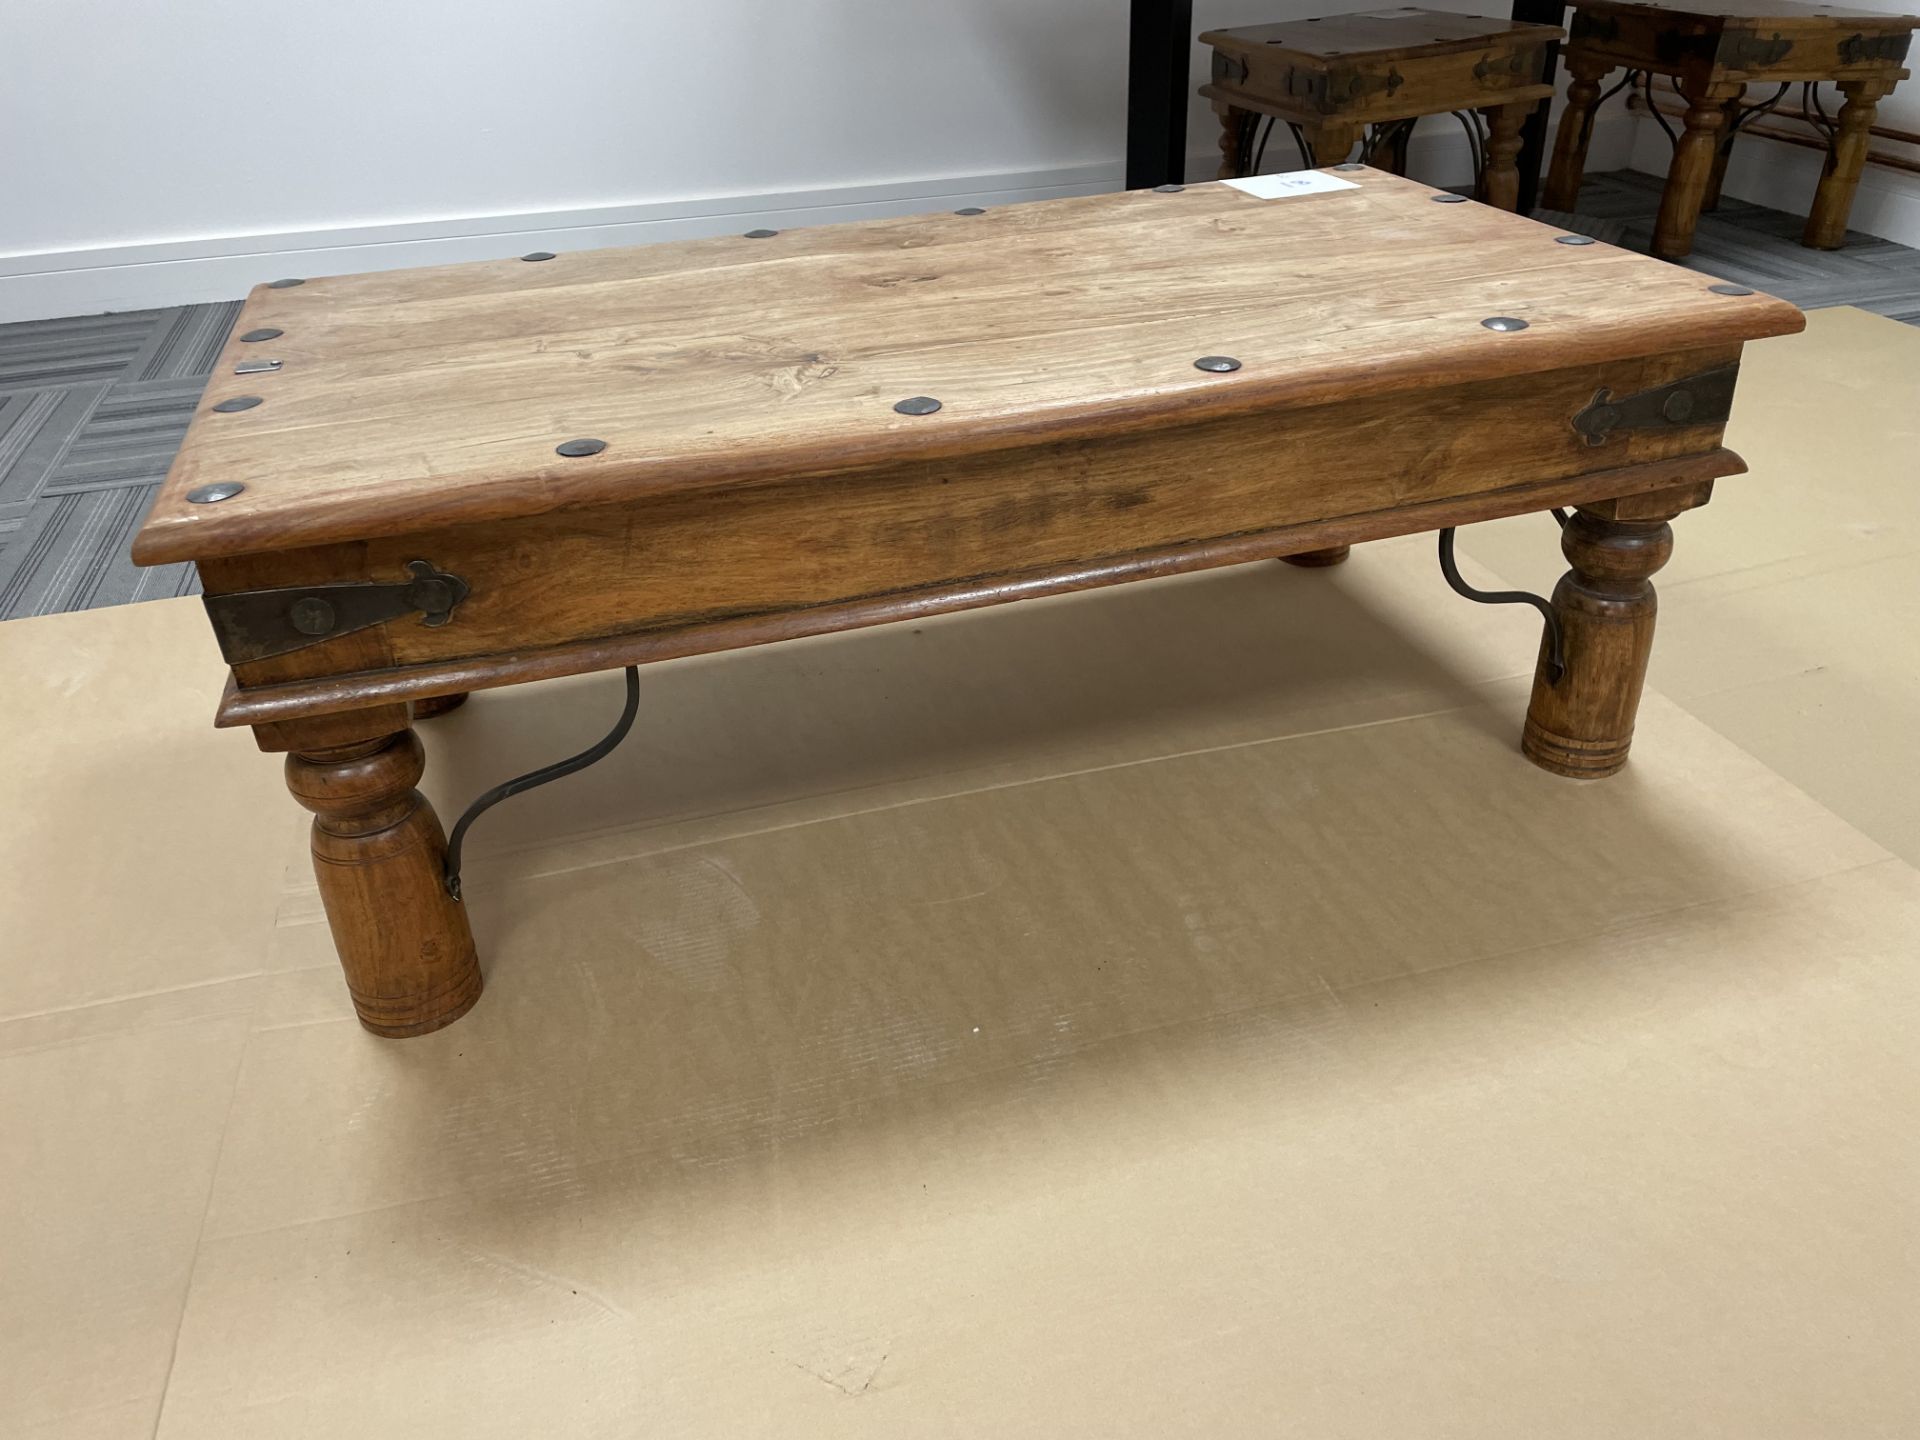 ANTIQUE LOOK COFFEE TABLE 1110 x 600 - Image 2 of 3